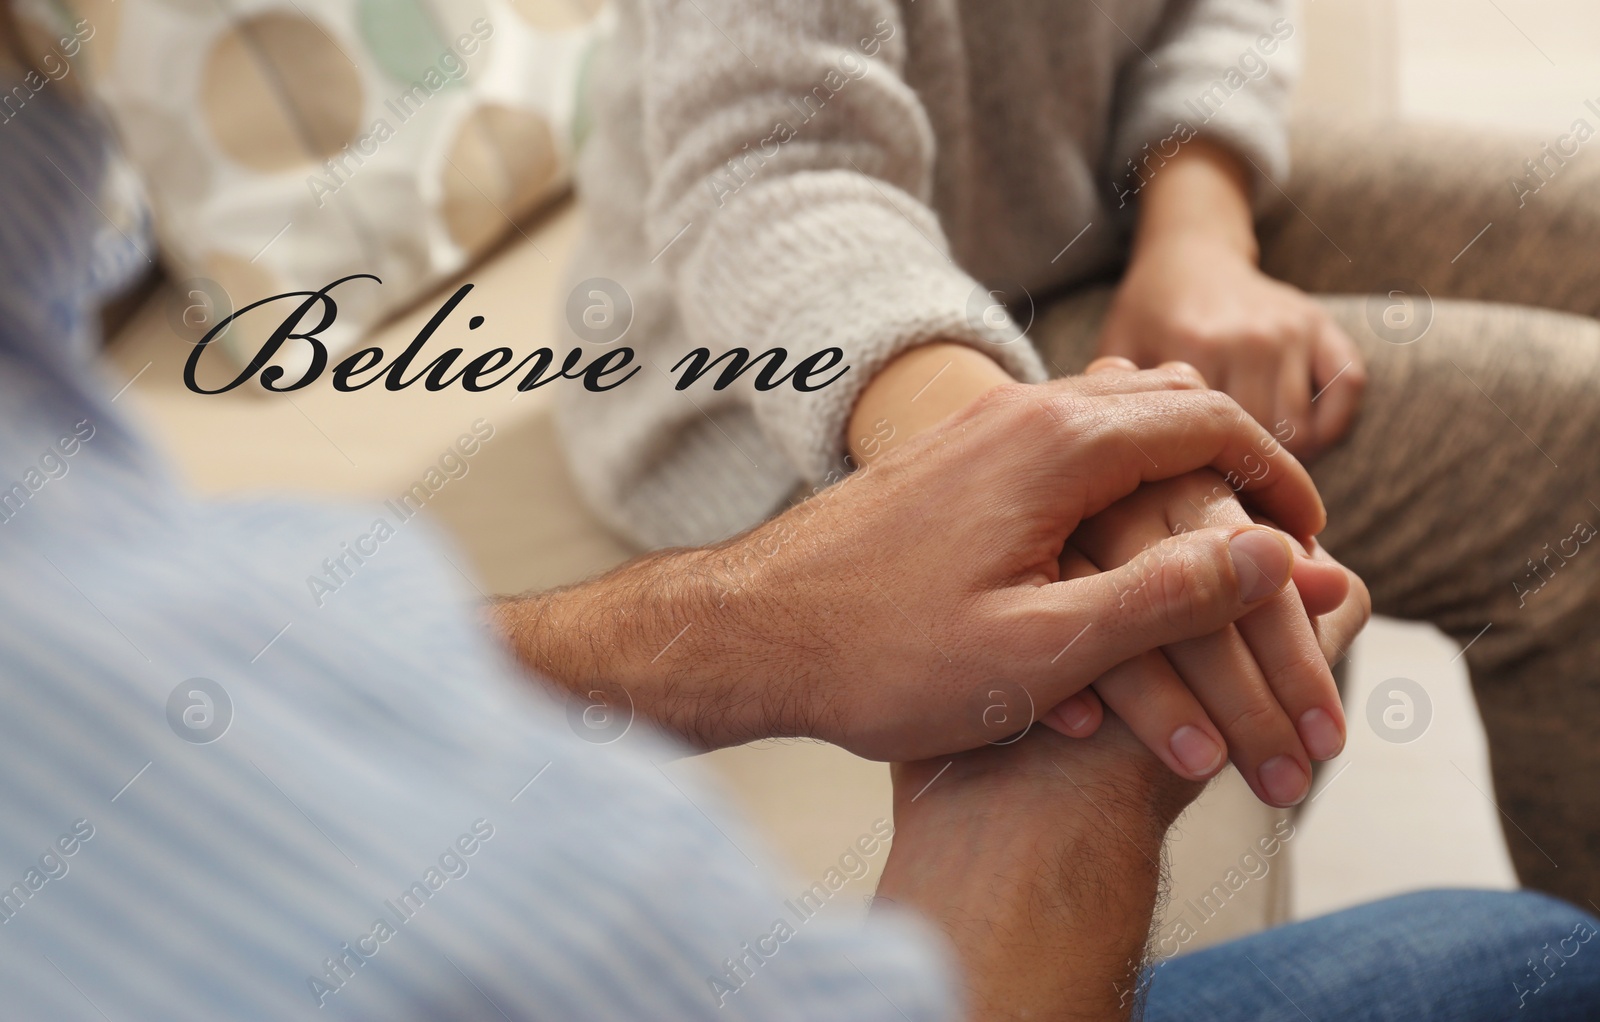 Image of Believe me, affirmation. Man comforting woman, closeup of hands